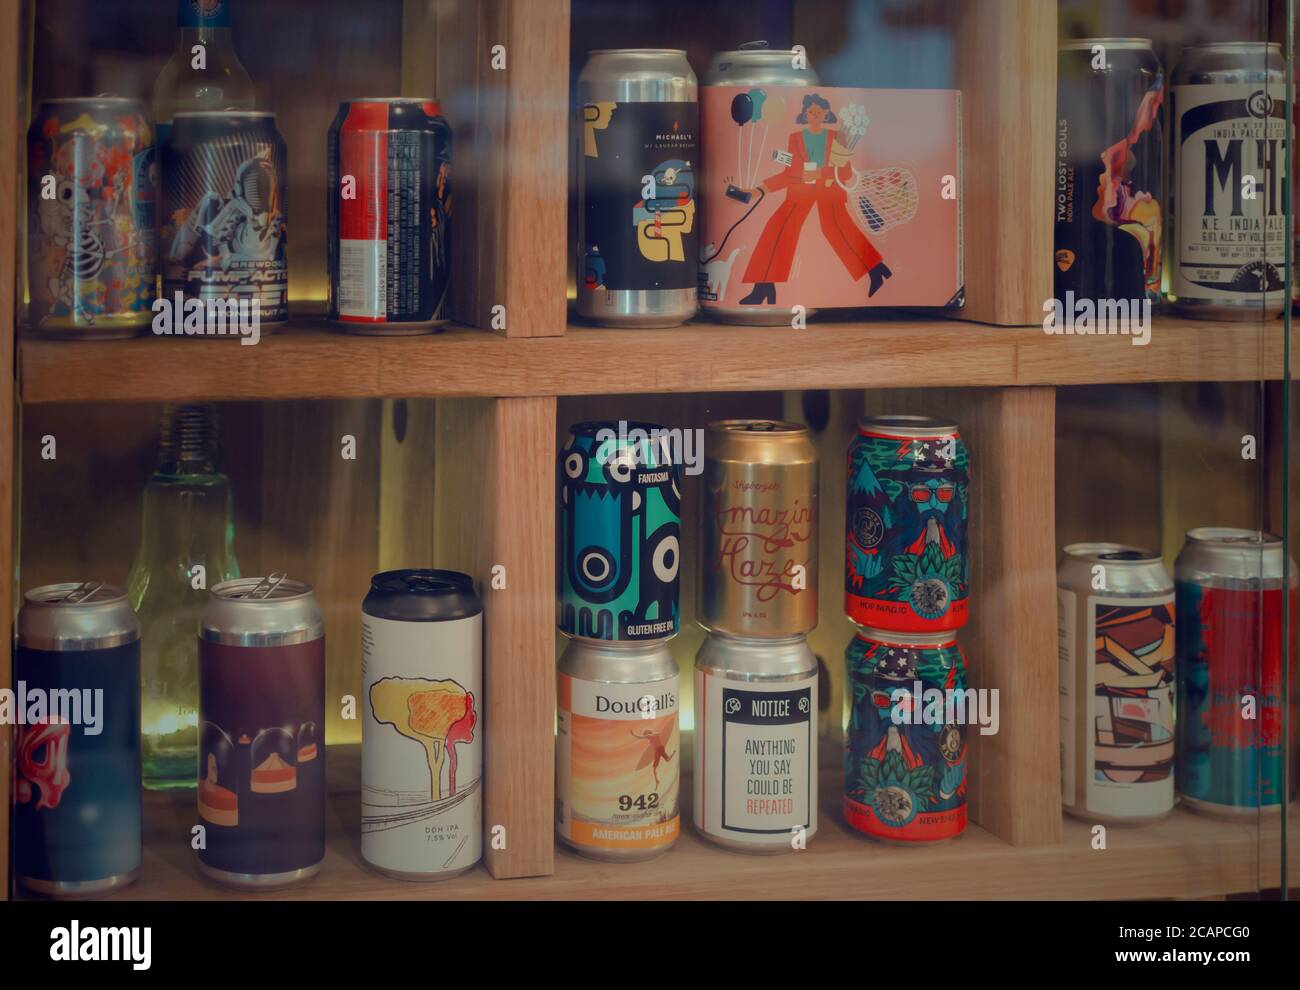 Cans of craft beers on a shelf. Hops&Dreams, Seville, Spain Stock Photo